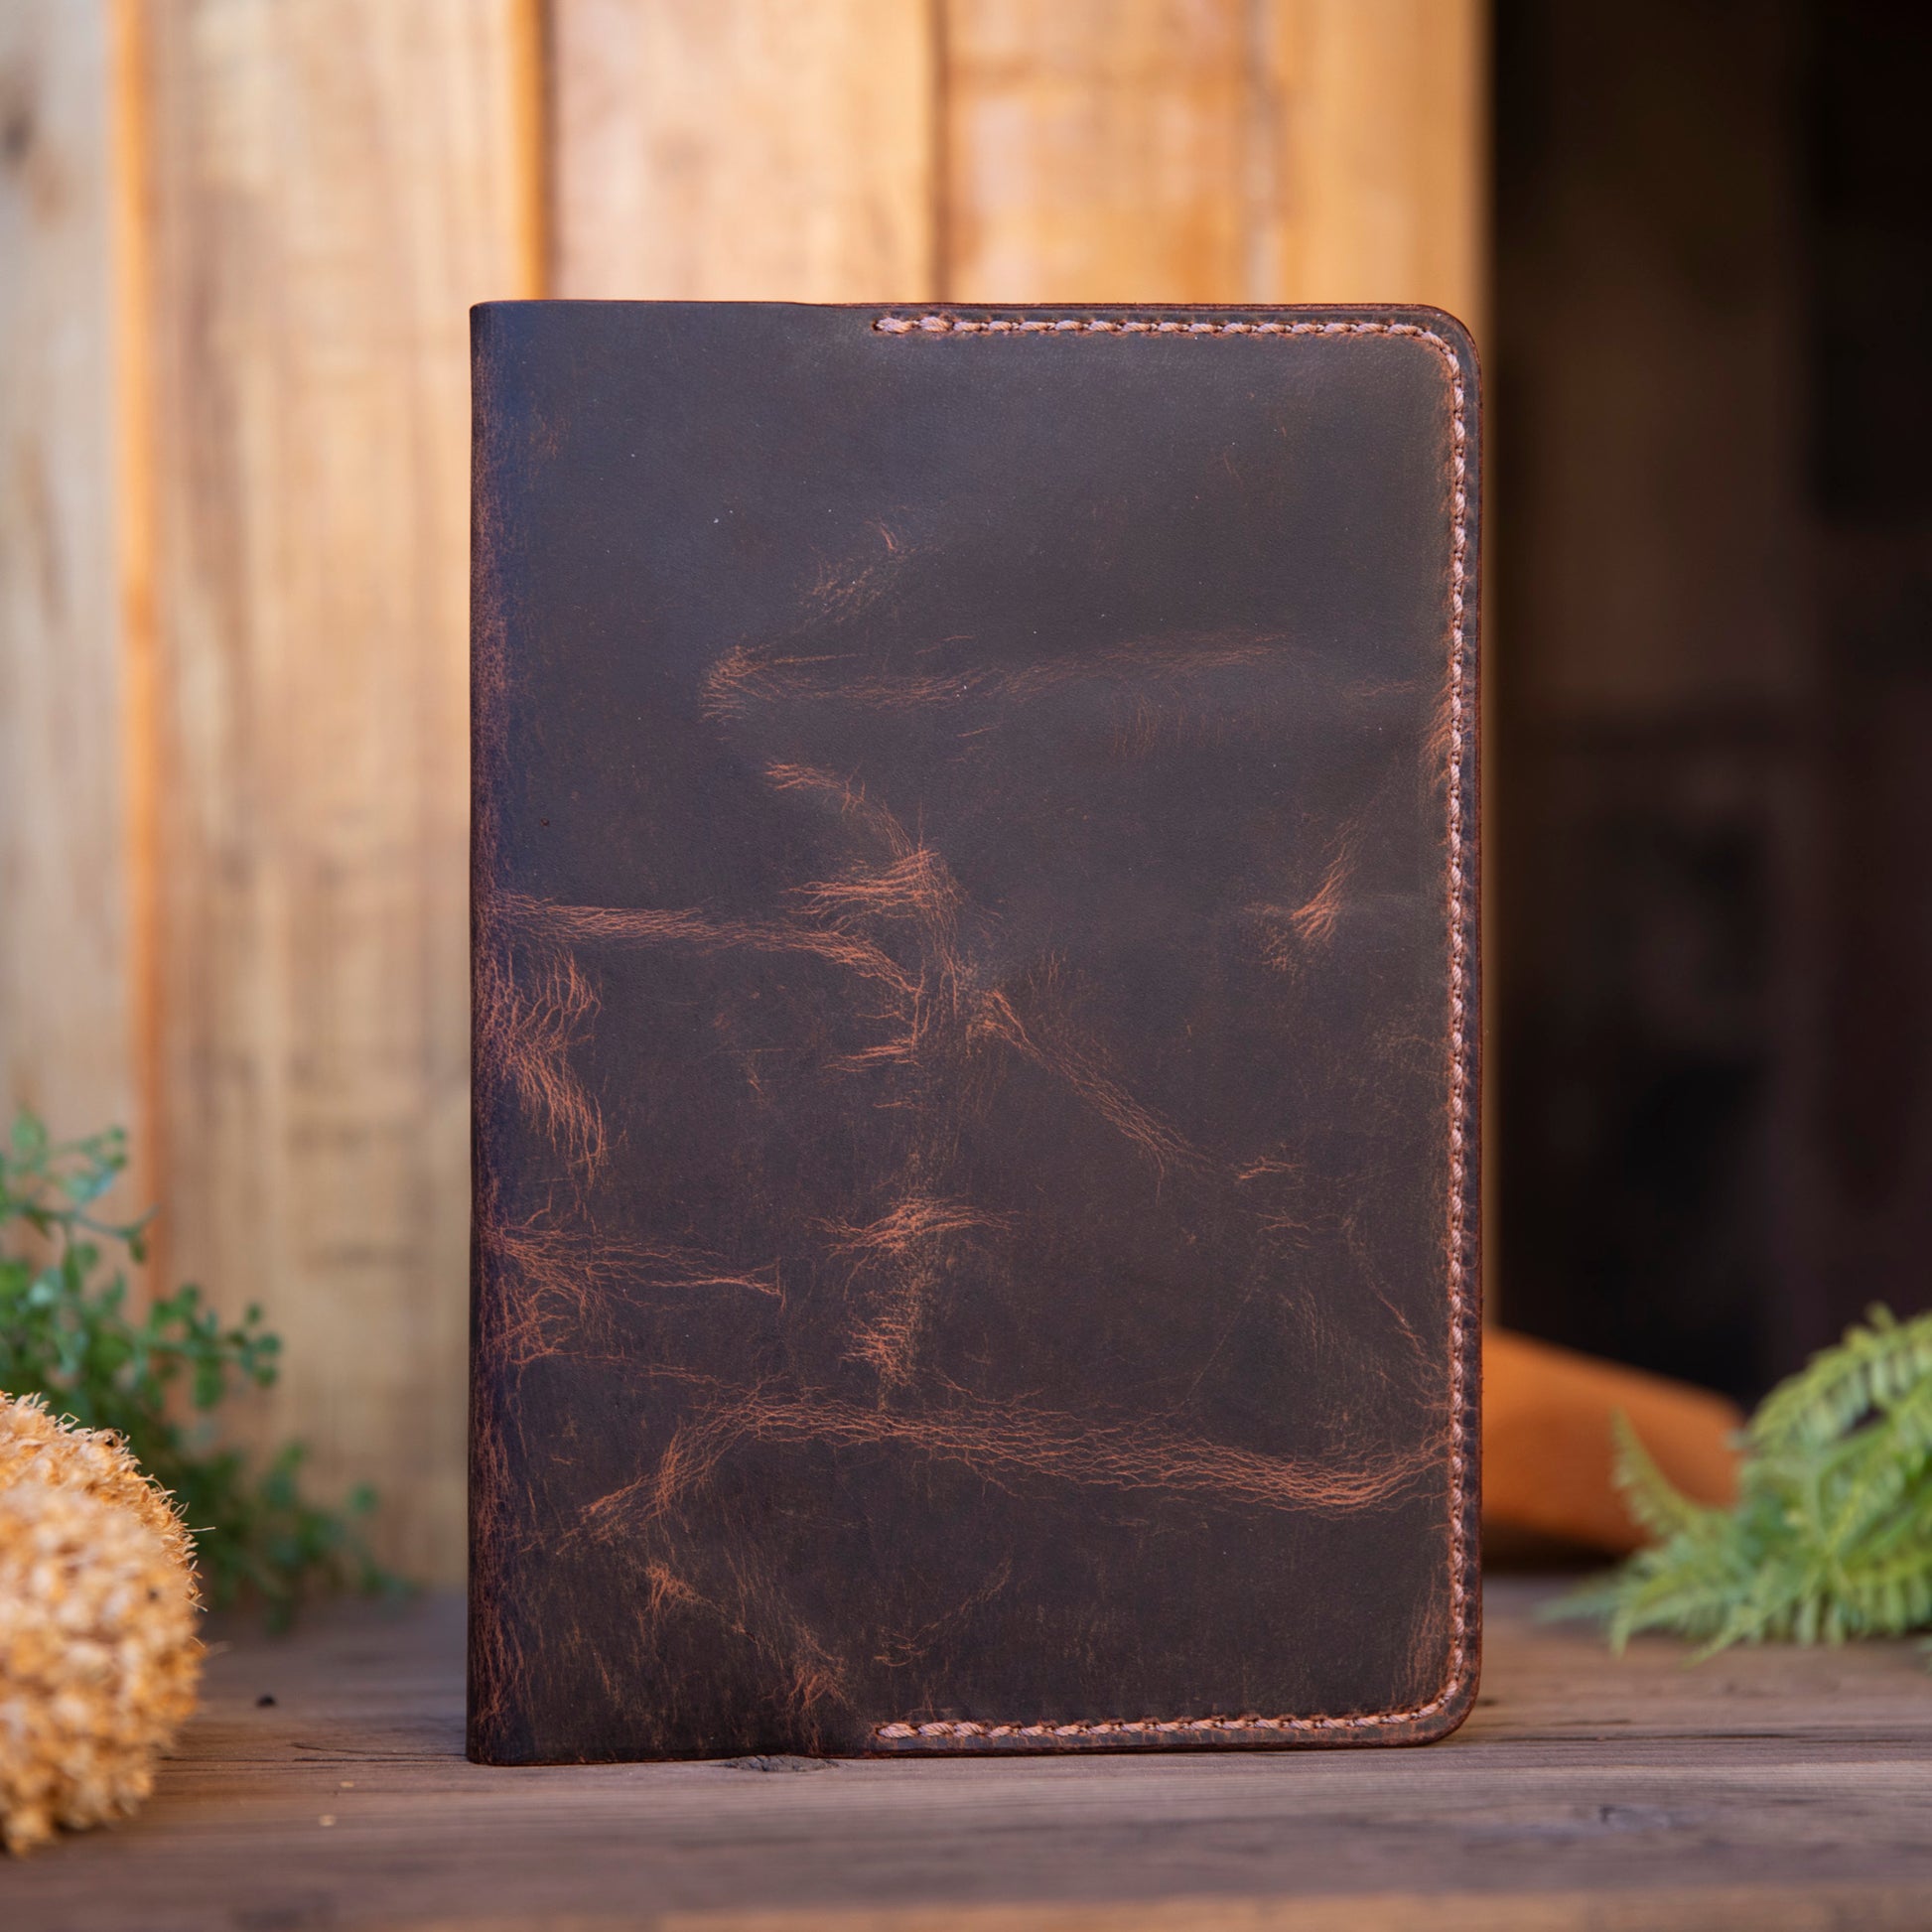 Oil Tan Leather Notebook Journal with Pen Pocket - Lazy 3 Leather Company